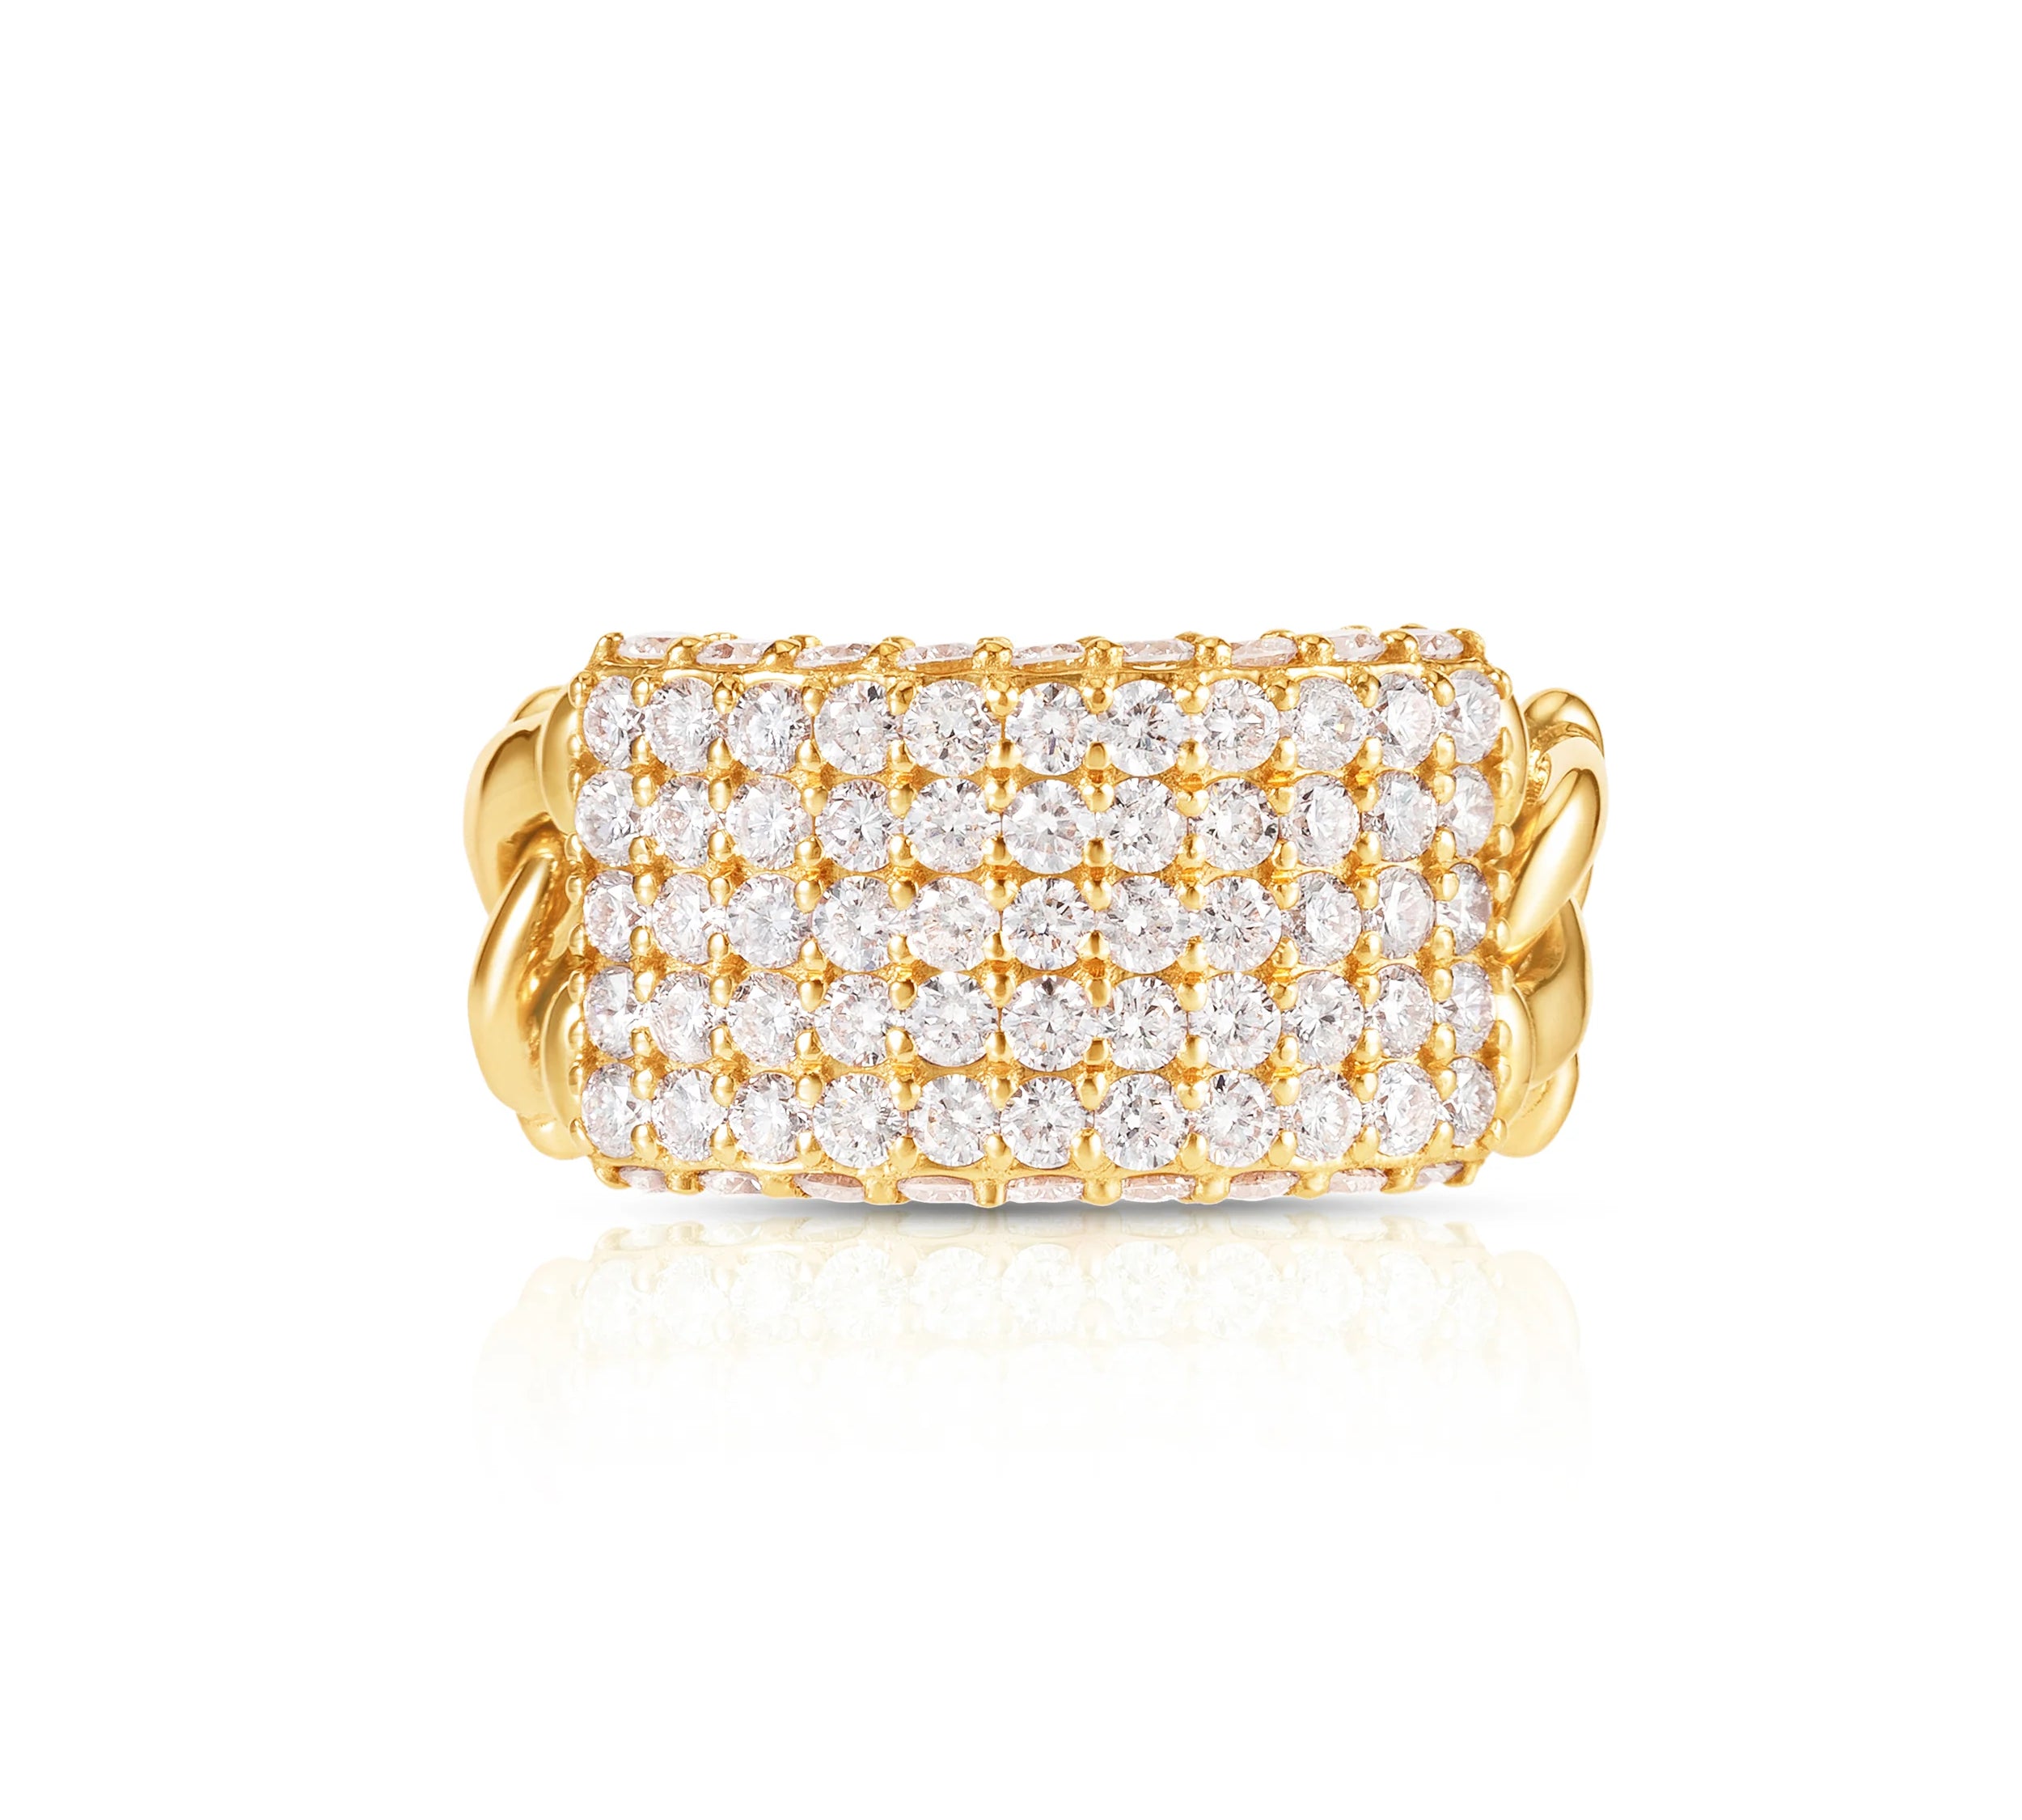 Diamond ID Link Ring Statement Carbon and Hyde Yellow Gold  